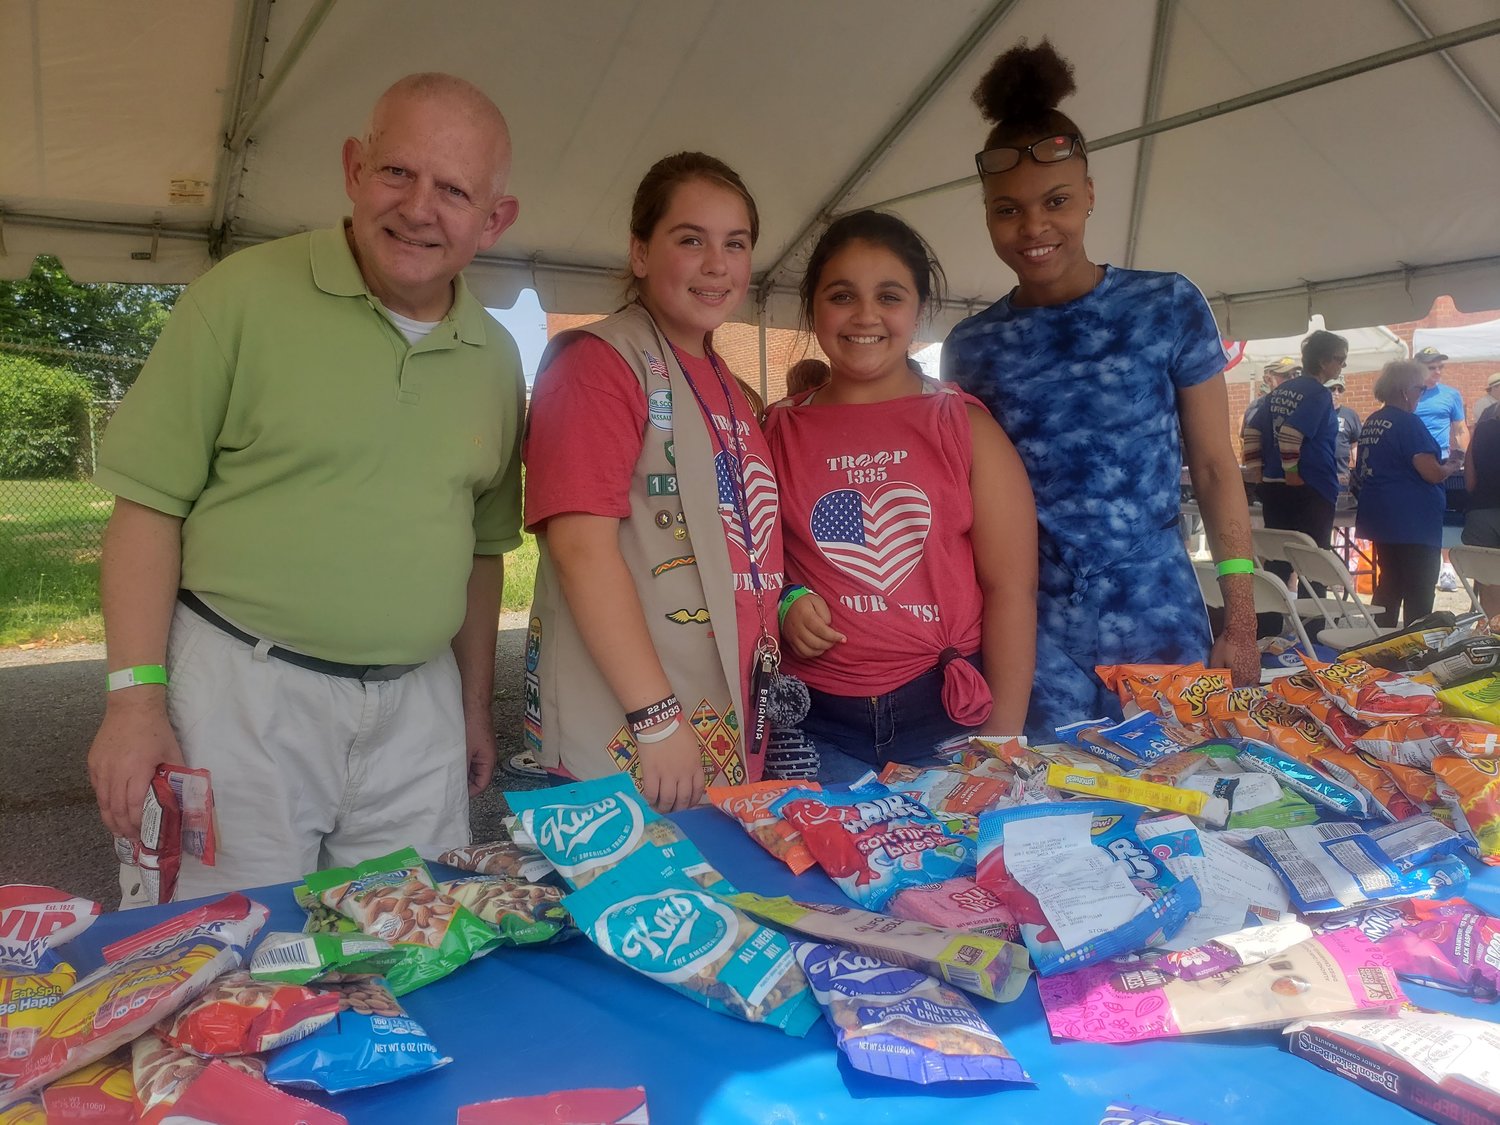 Elmont Girl Scout Troop 1335 and Freeport AHRC Nassau volunteers, from left, Ralph Gilloon, Natalie Becker, Sammy Vacchian and Neffertiti Dolce.